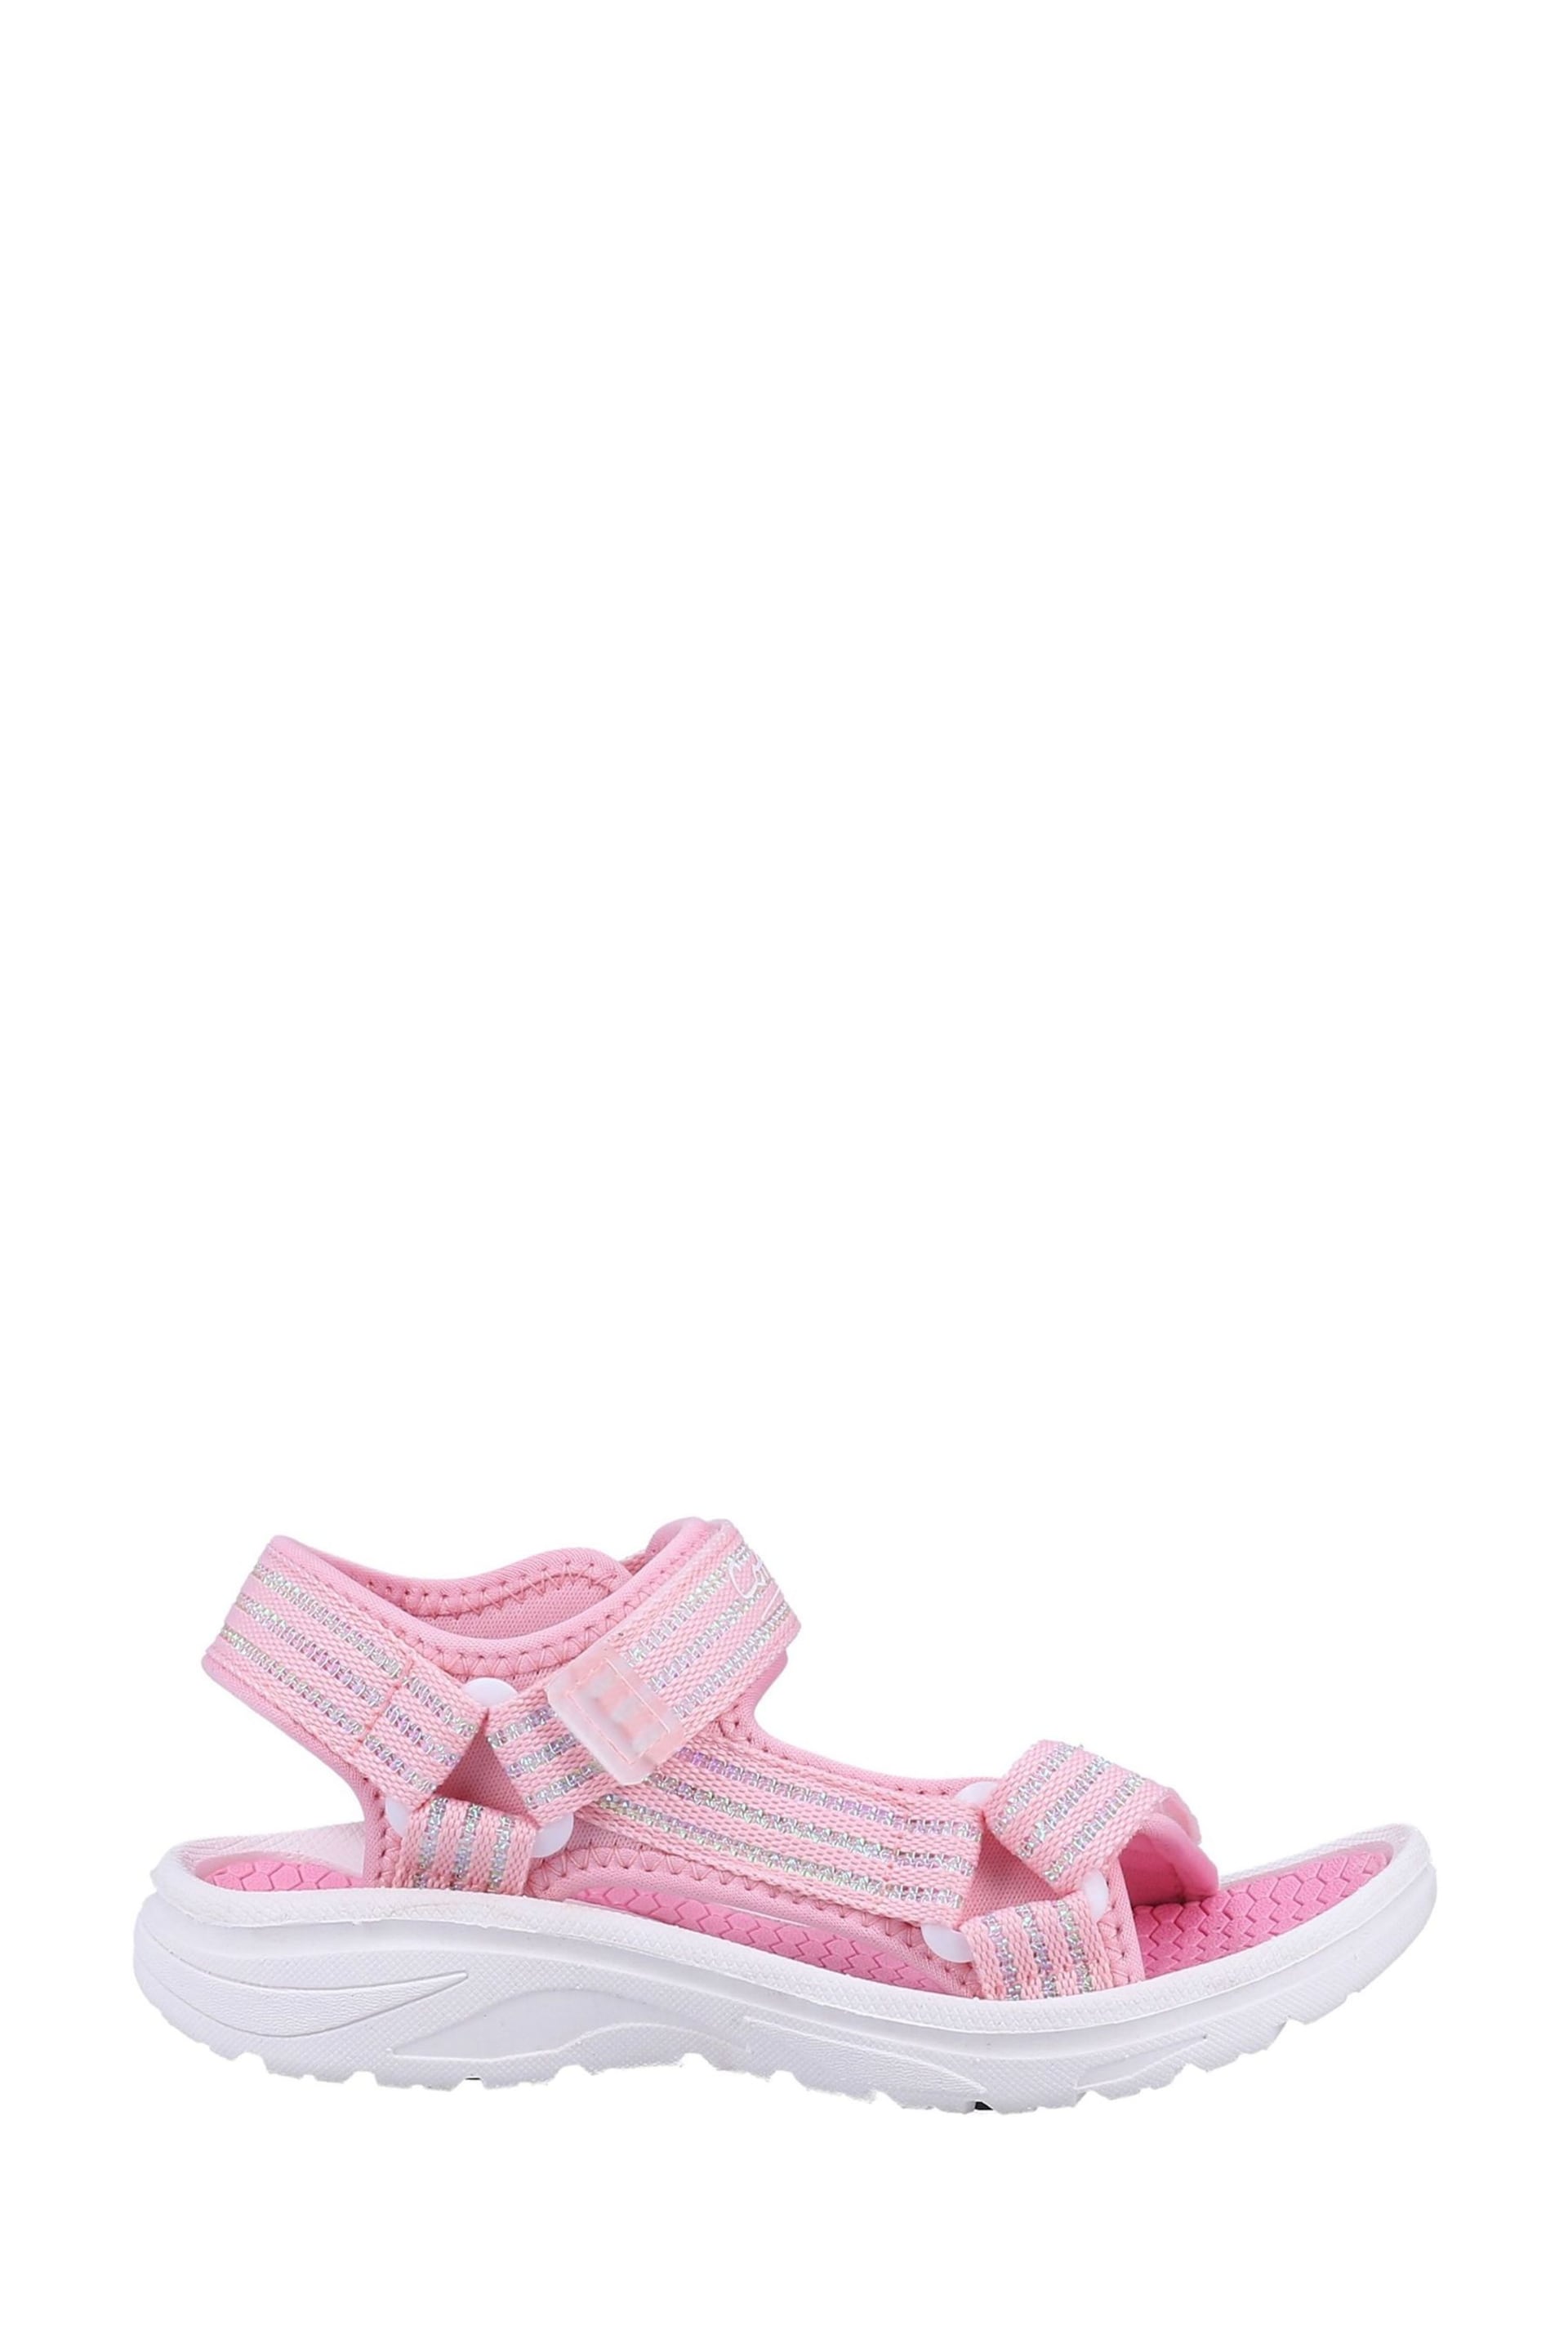 Cotswold Pink Bodiam Sandals - Image 1 of 4